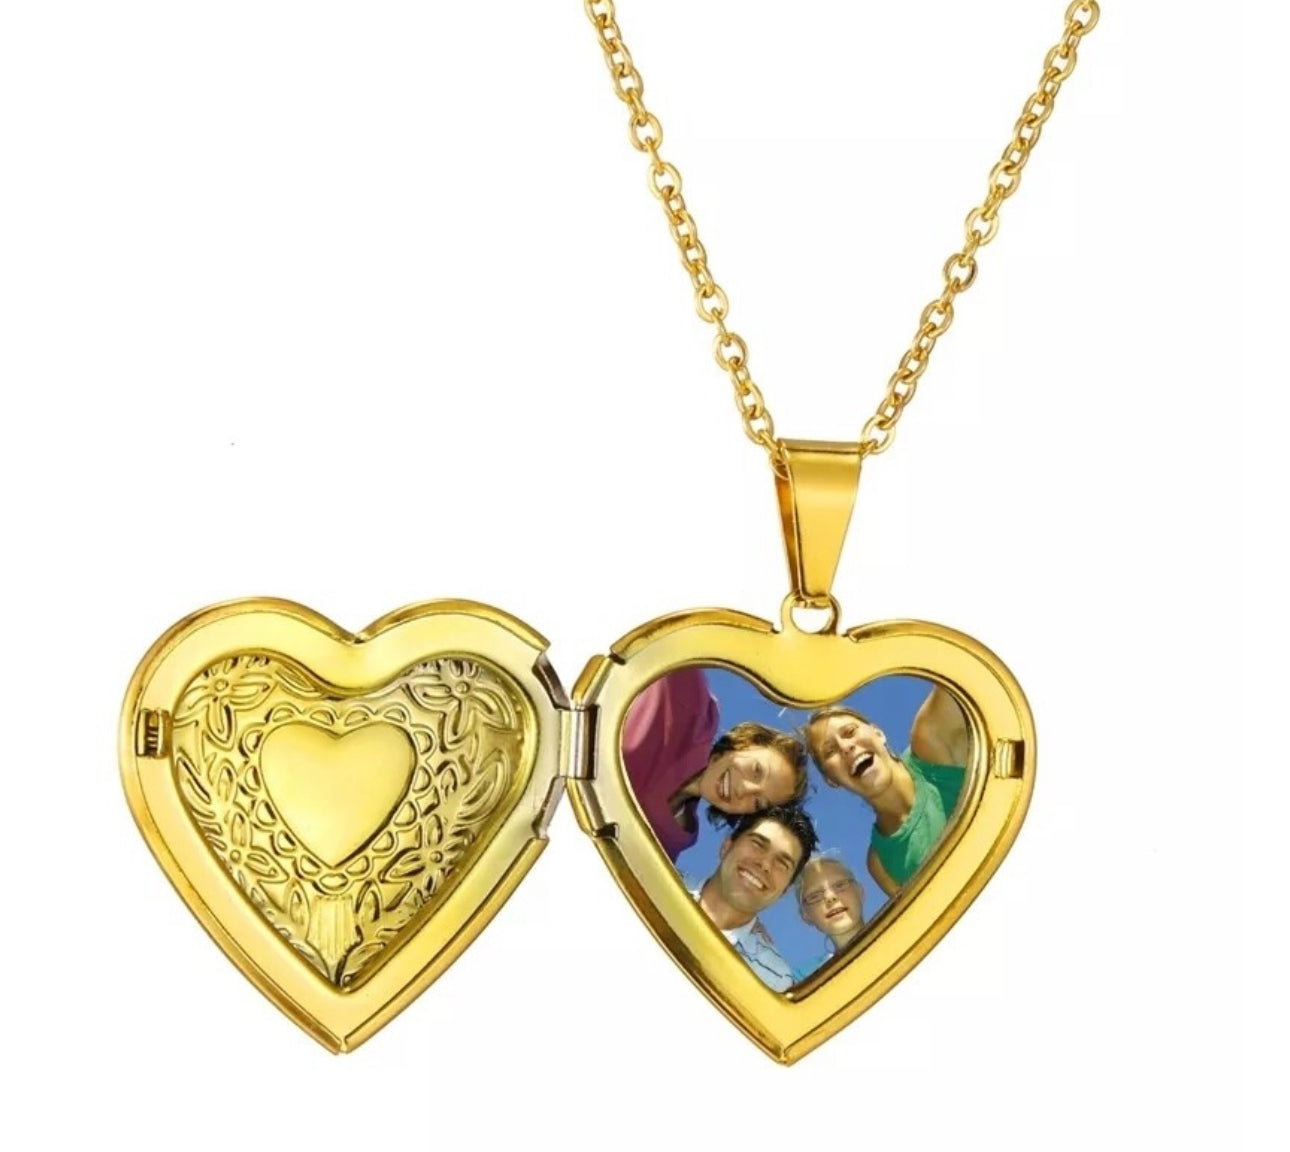 Stainless steel gold plated custom heart locket ( includes picture ) Mother’s Day gift